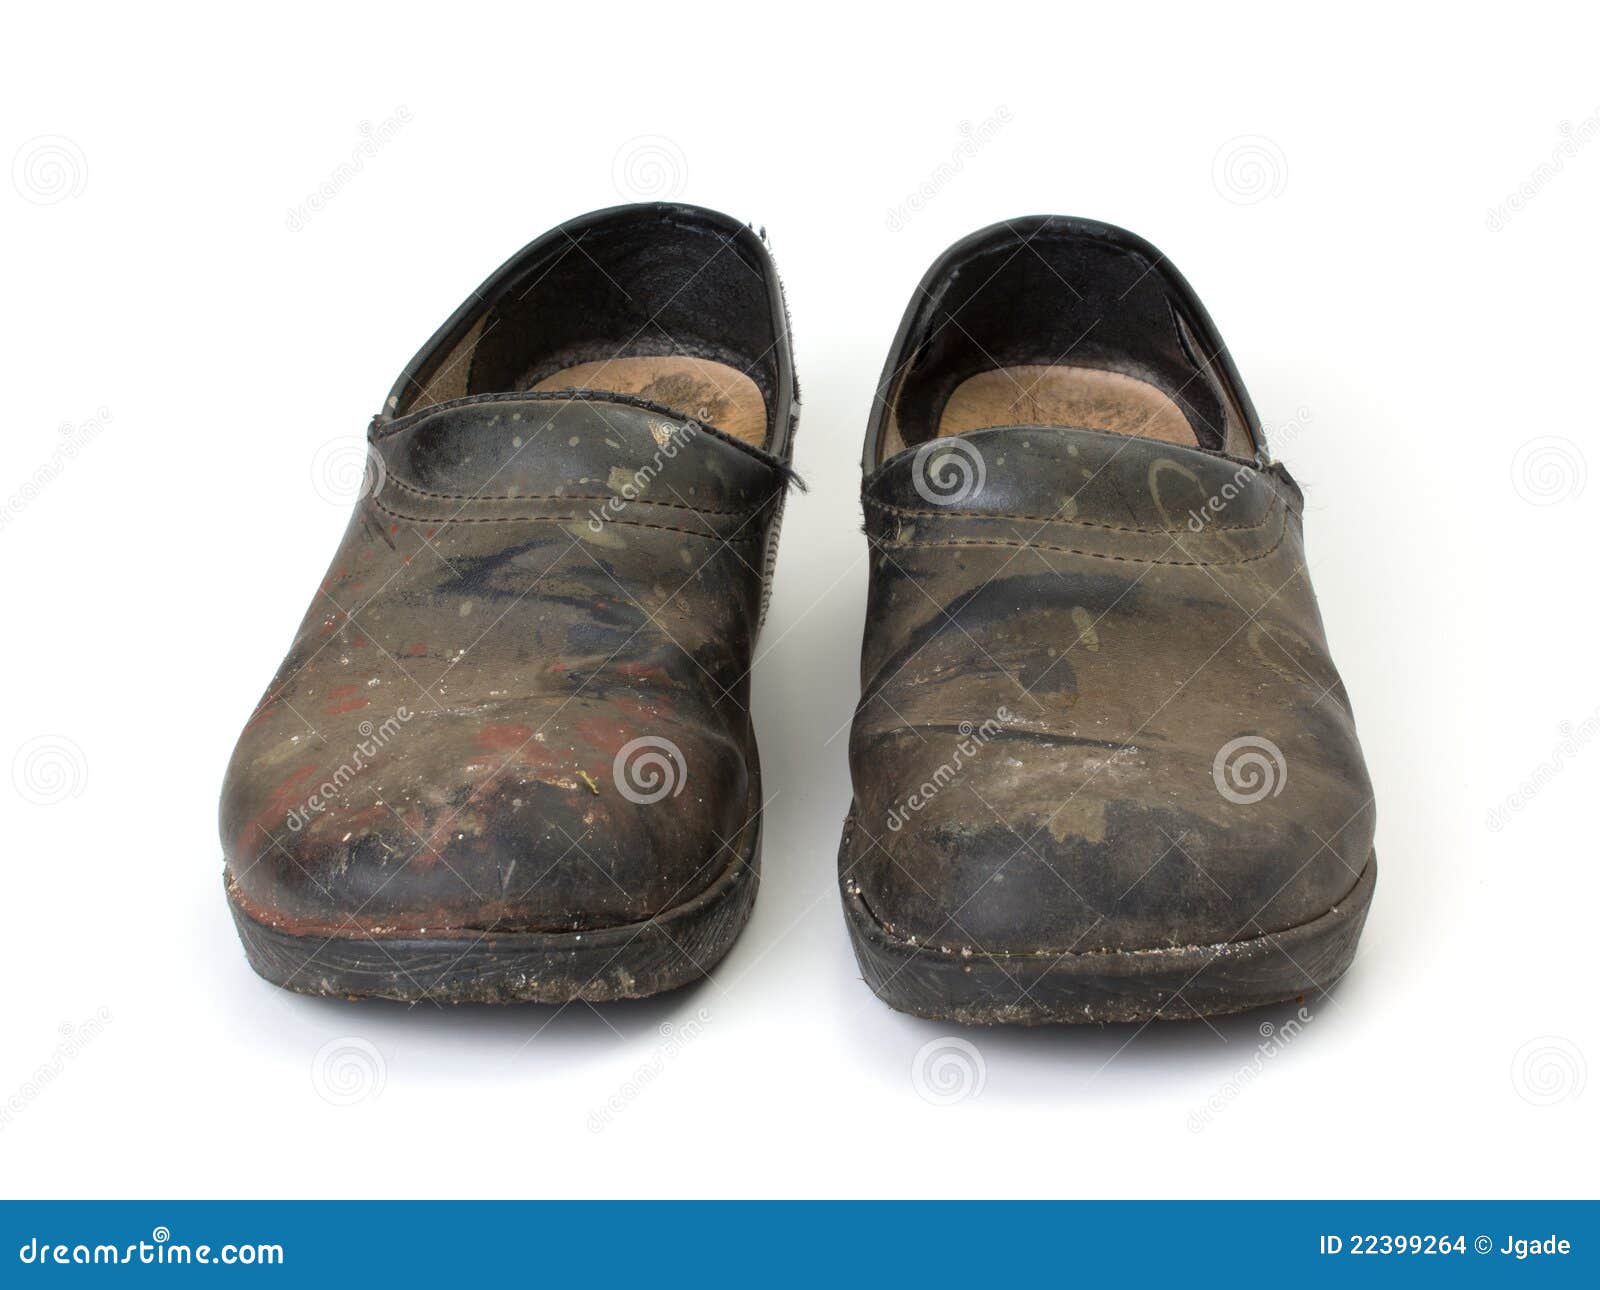 Worn out clogs stock photo. Image of wear, black, stains - 22399264